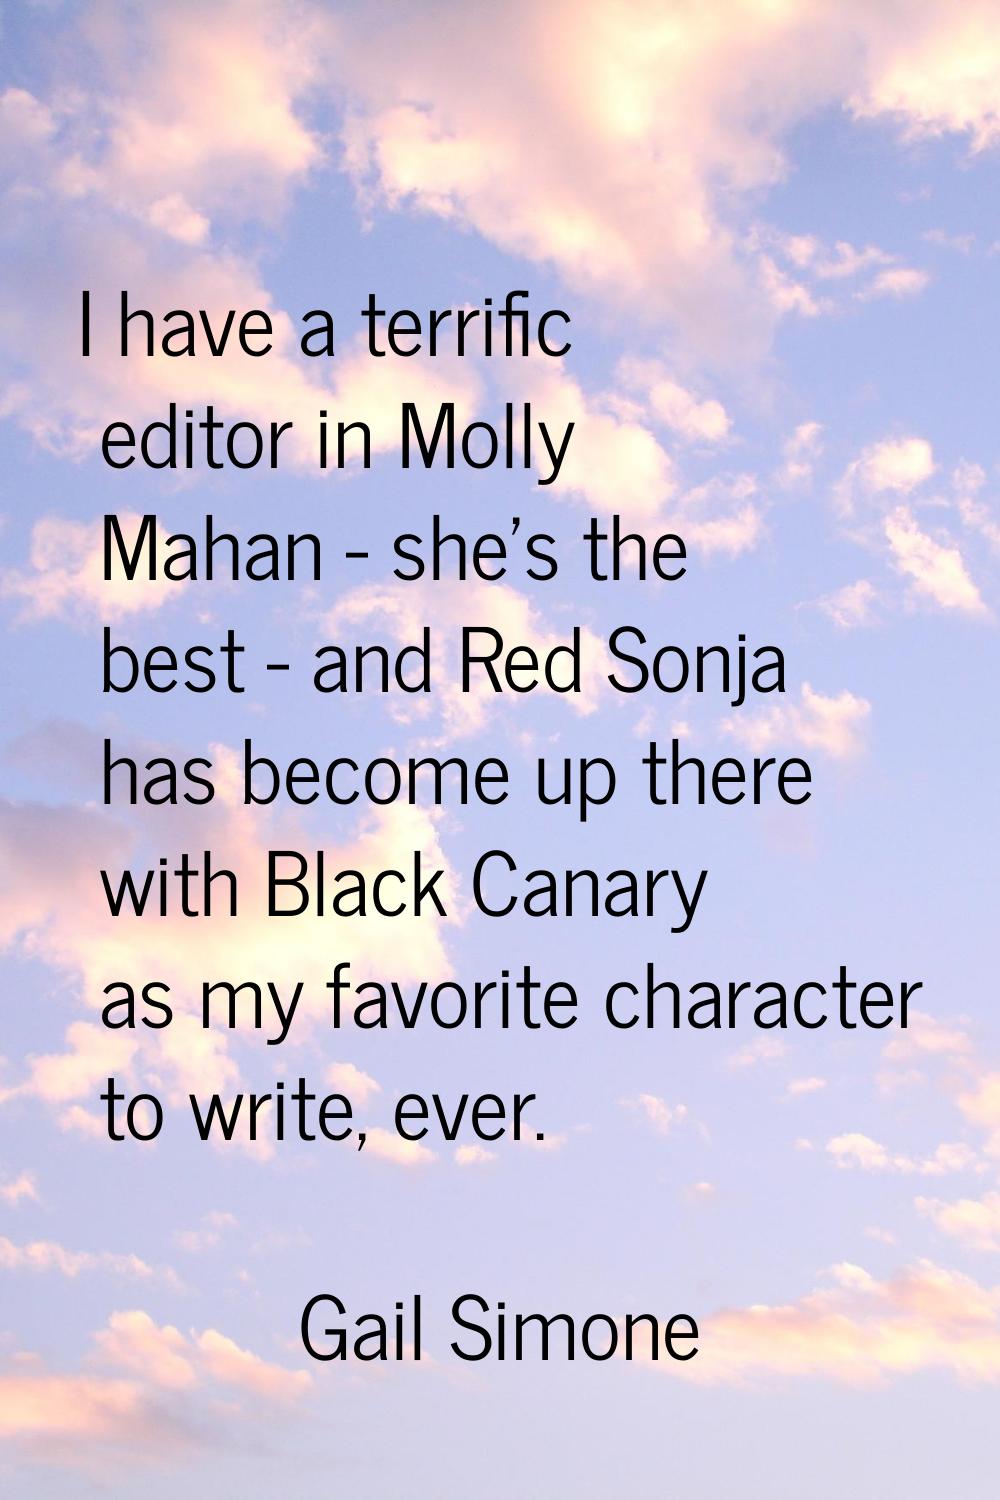 I have a terrific editor in Molly Mahan - she's the best - and Red Sonja has become up there with B